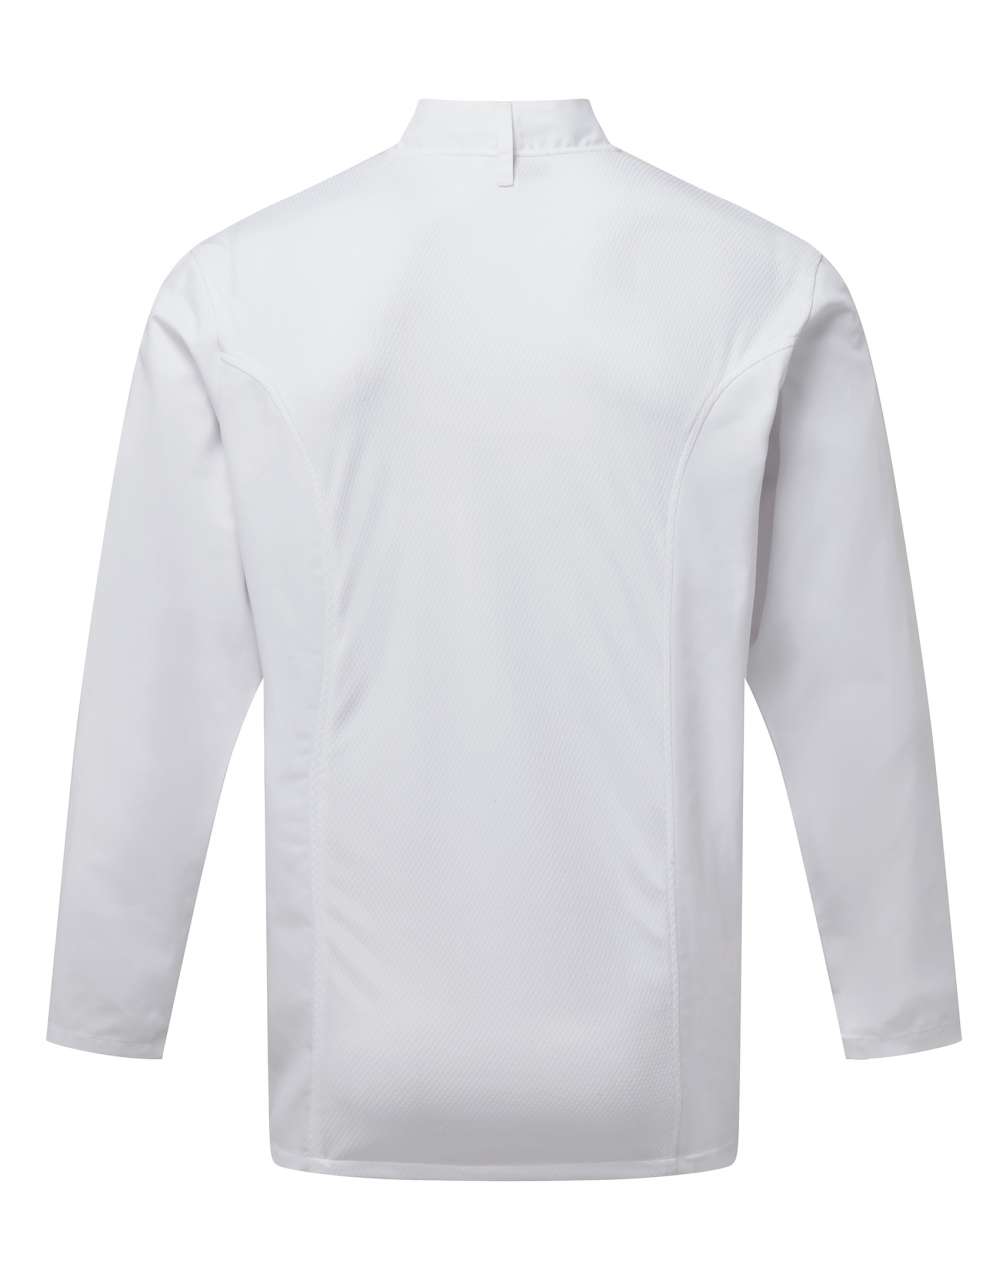 CHEF'S LONG SLEEVE COOLCHECKER® JACKET WITH MESH BACK PANEL s logom 